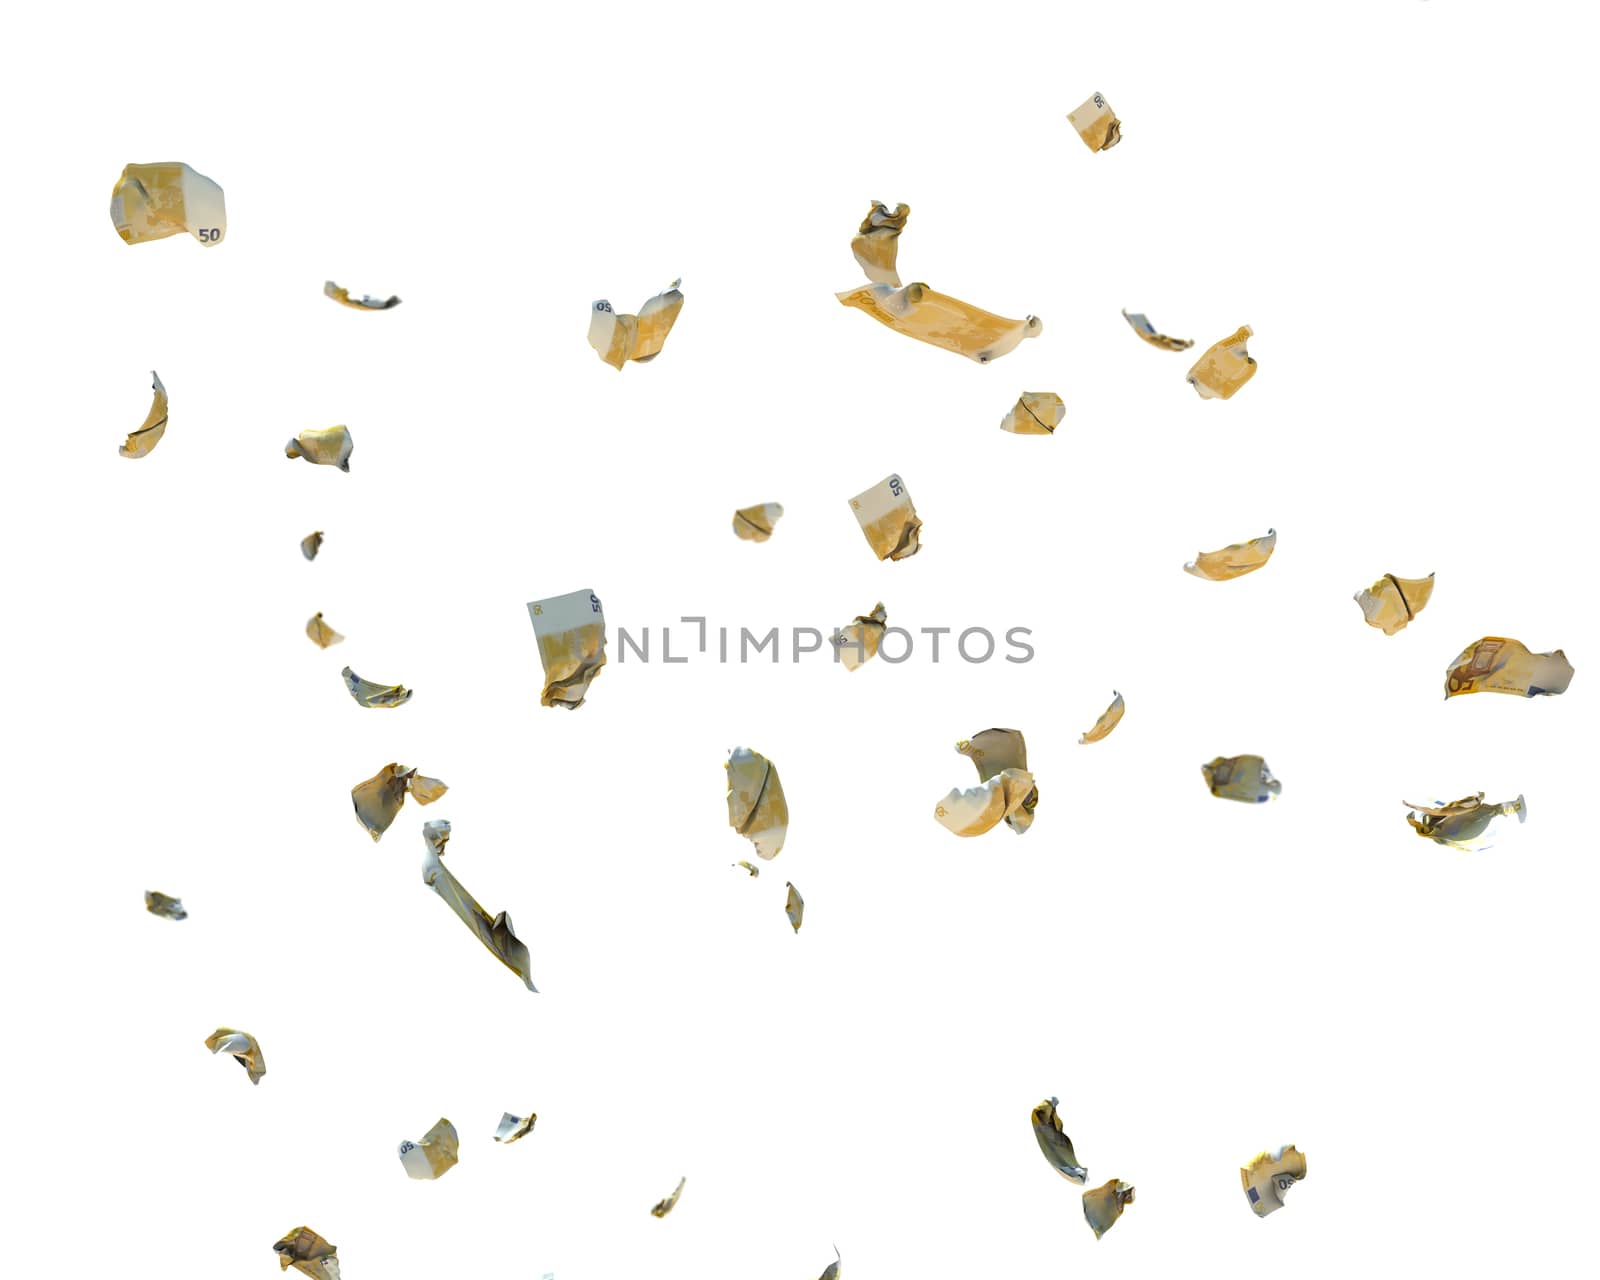 50 Euro Currency Crumpled Banknotes flying, against white, clipp by pixelfootage